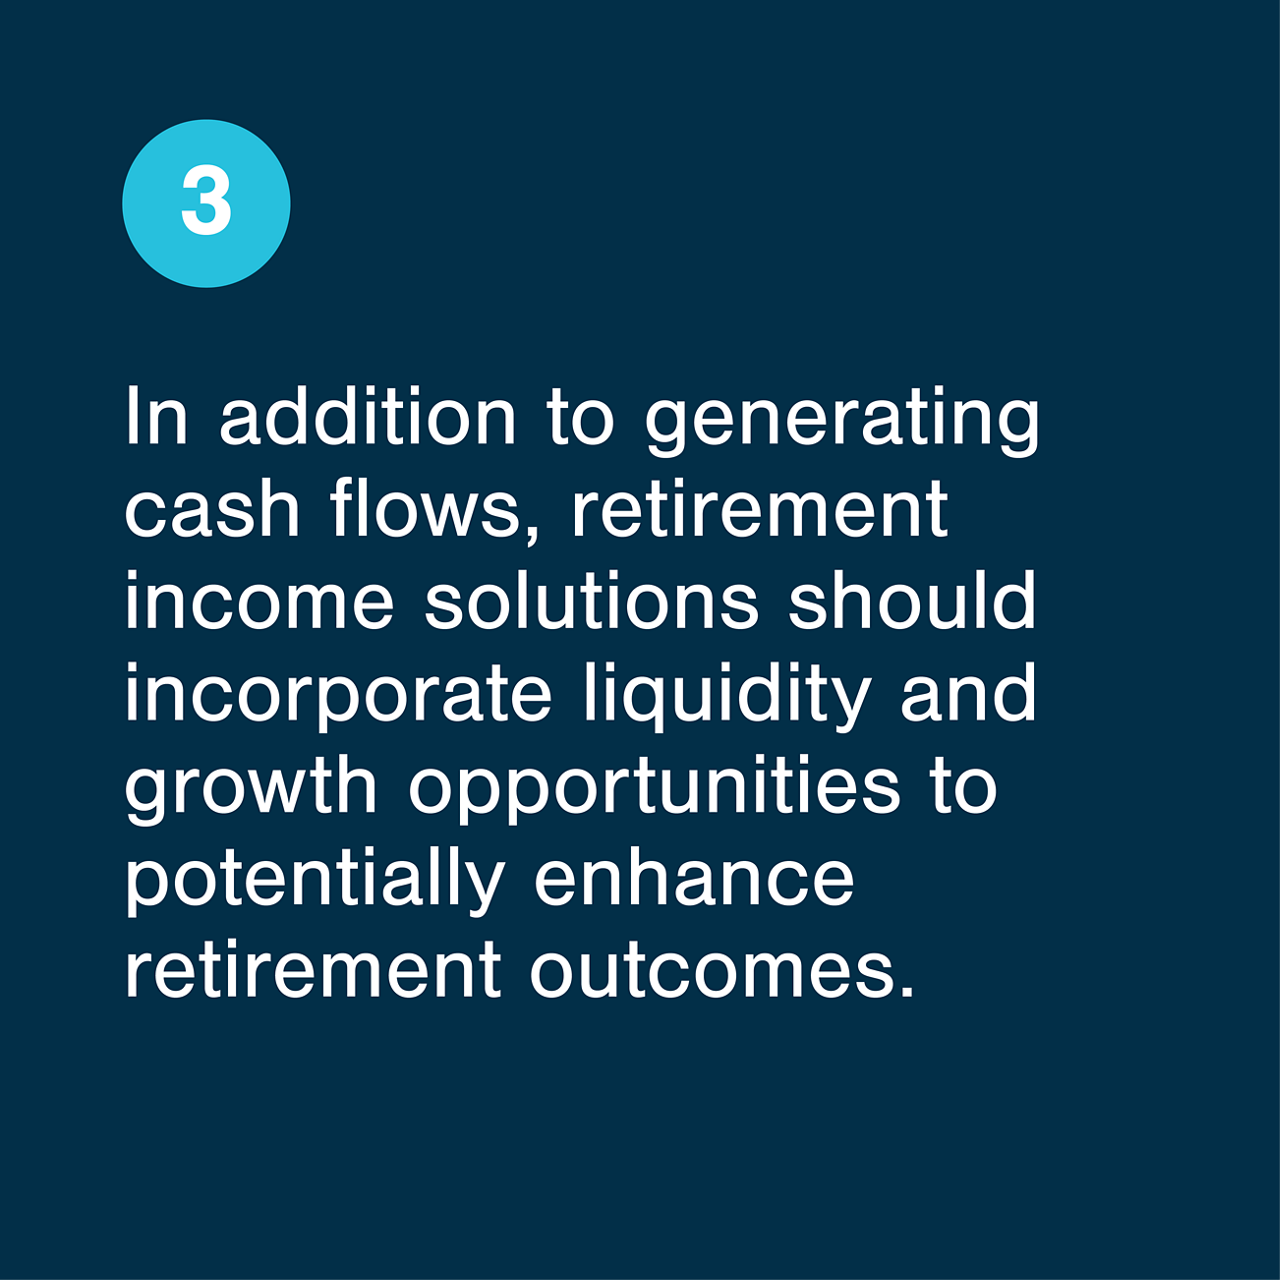 In addition to generating cash flows, retirement income solutions should incorporate liquidity and growth opportunities to potentially enhance retirement outcomes.